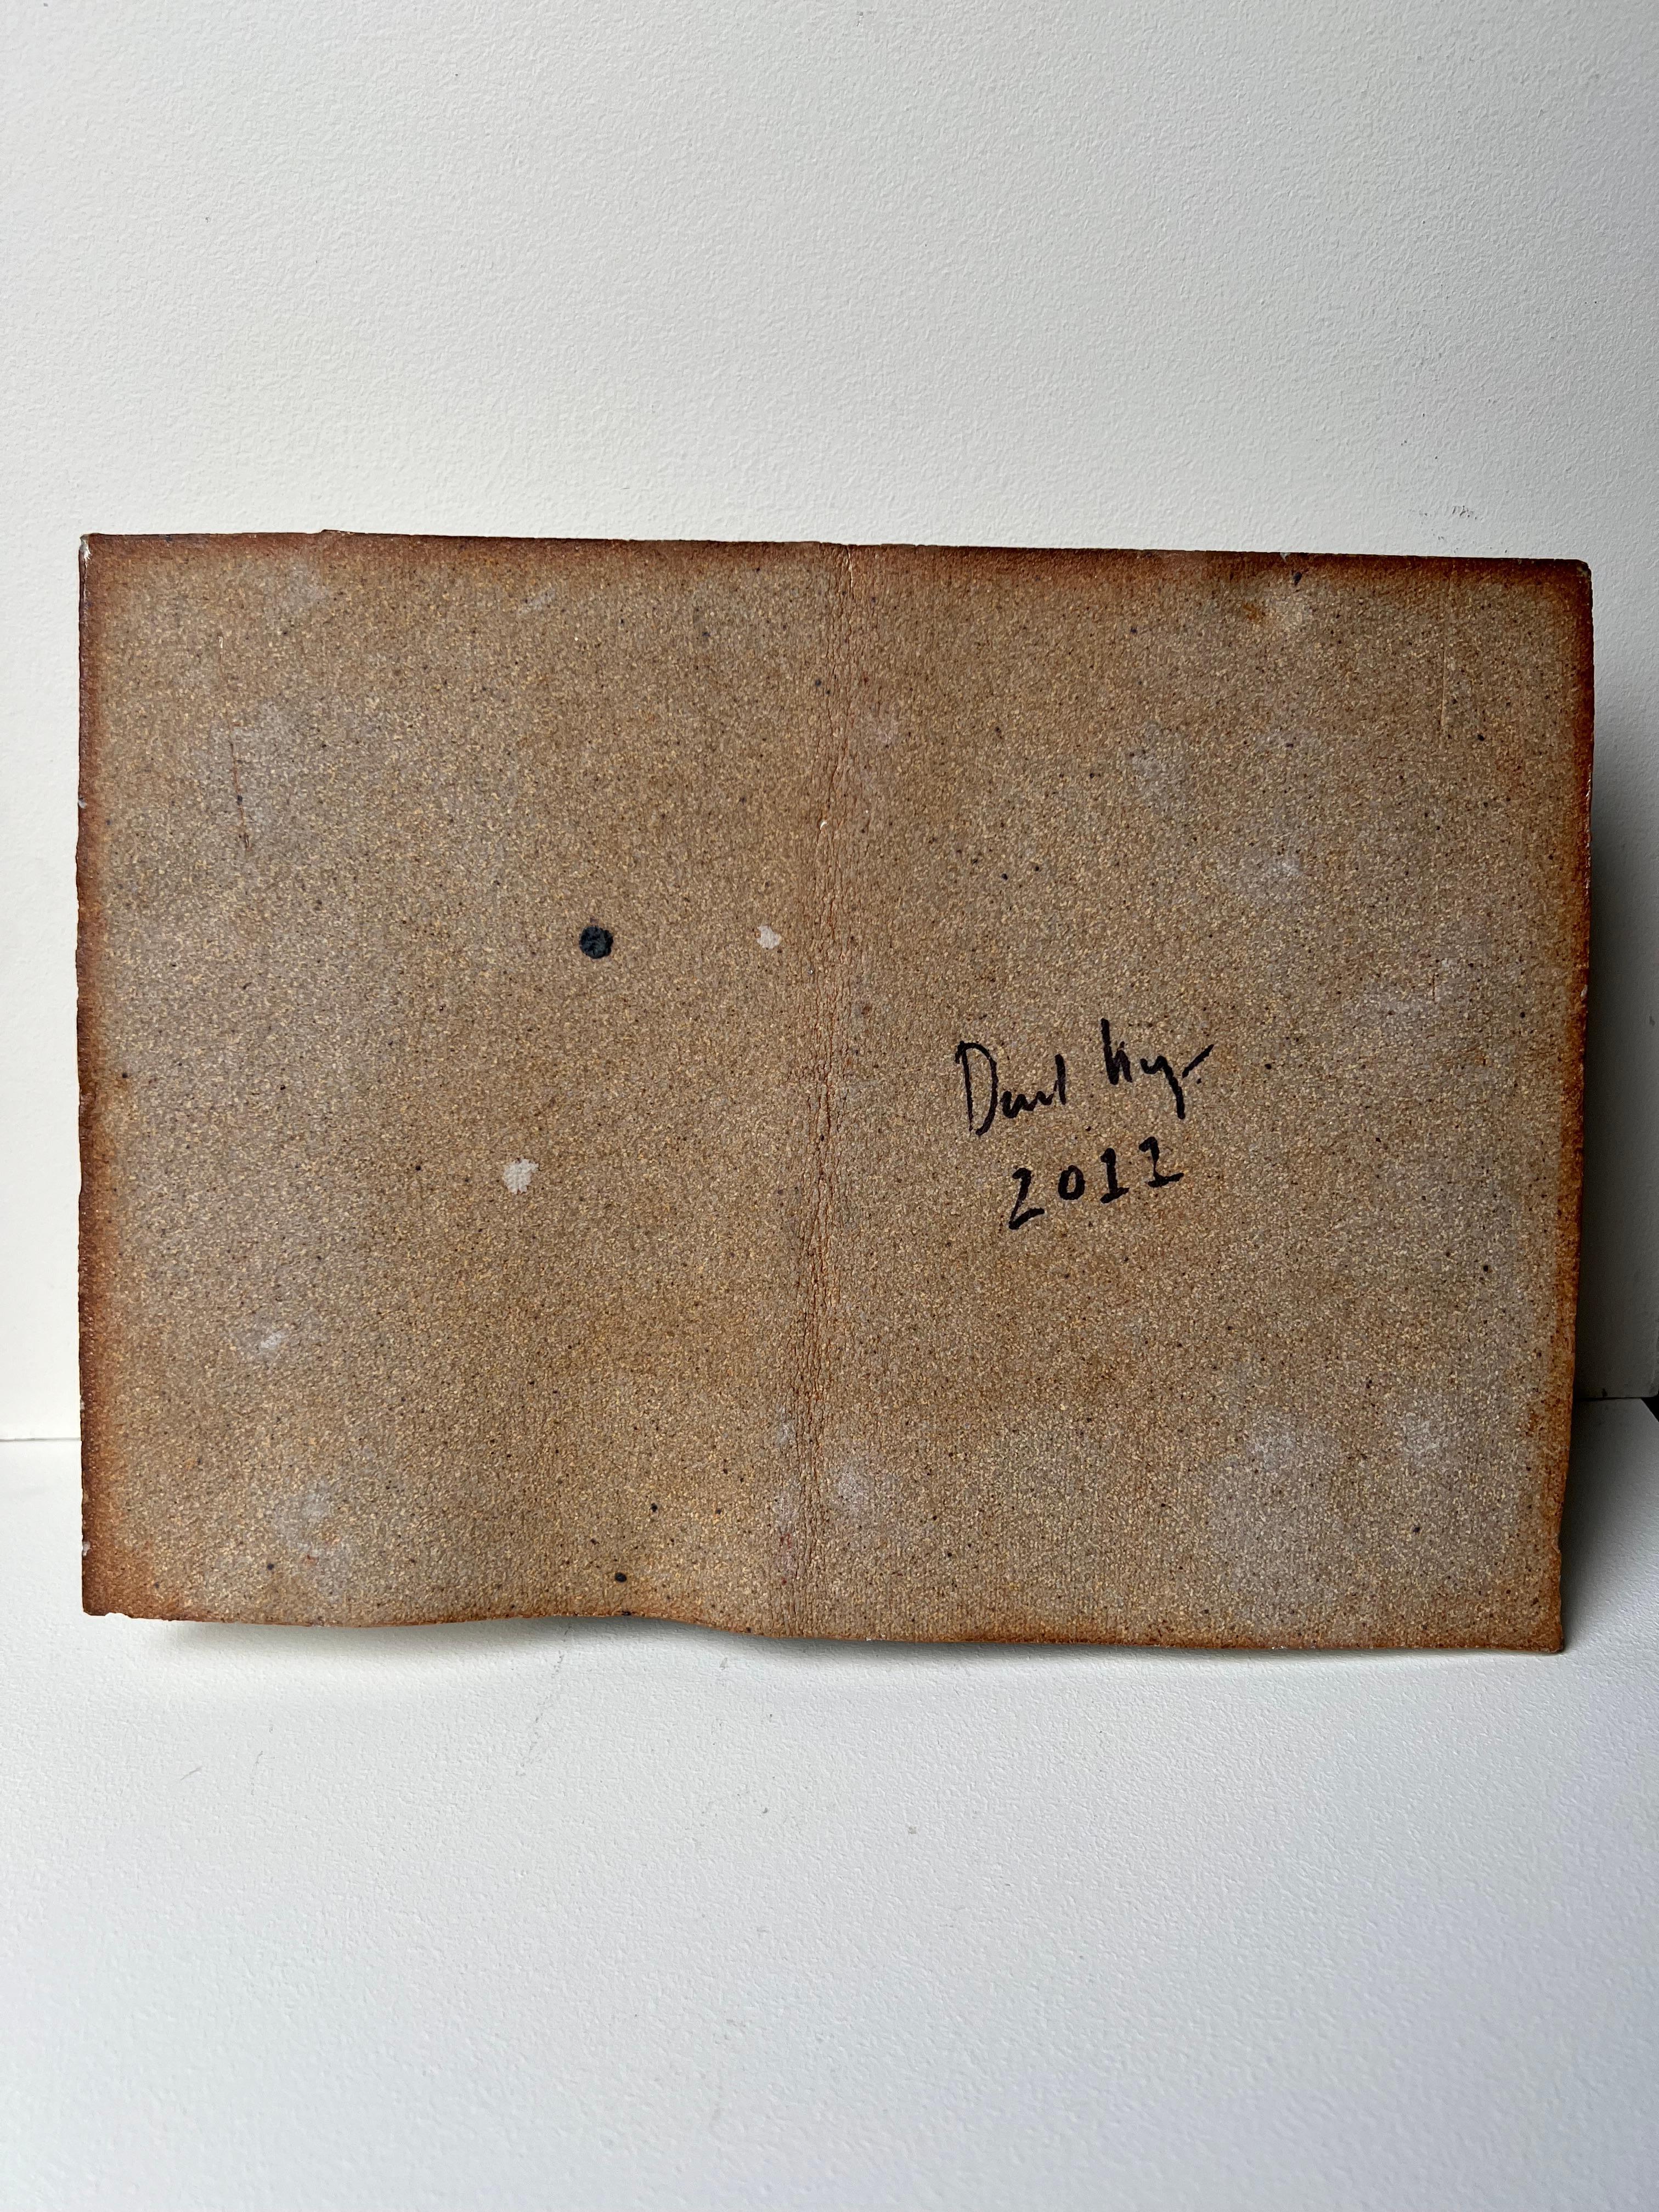 Contemporary Ceramic Book by David Korty For Sale